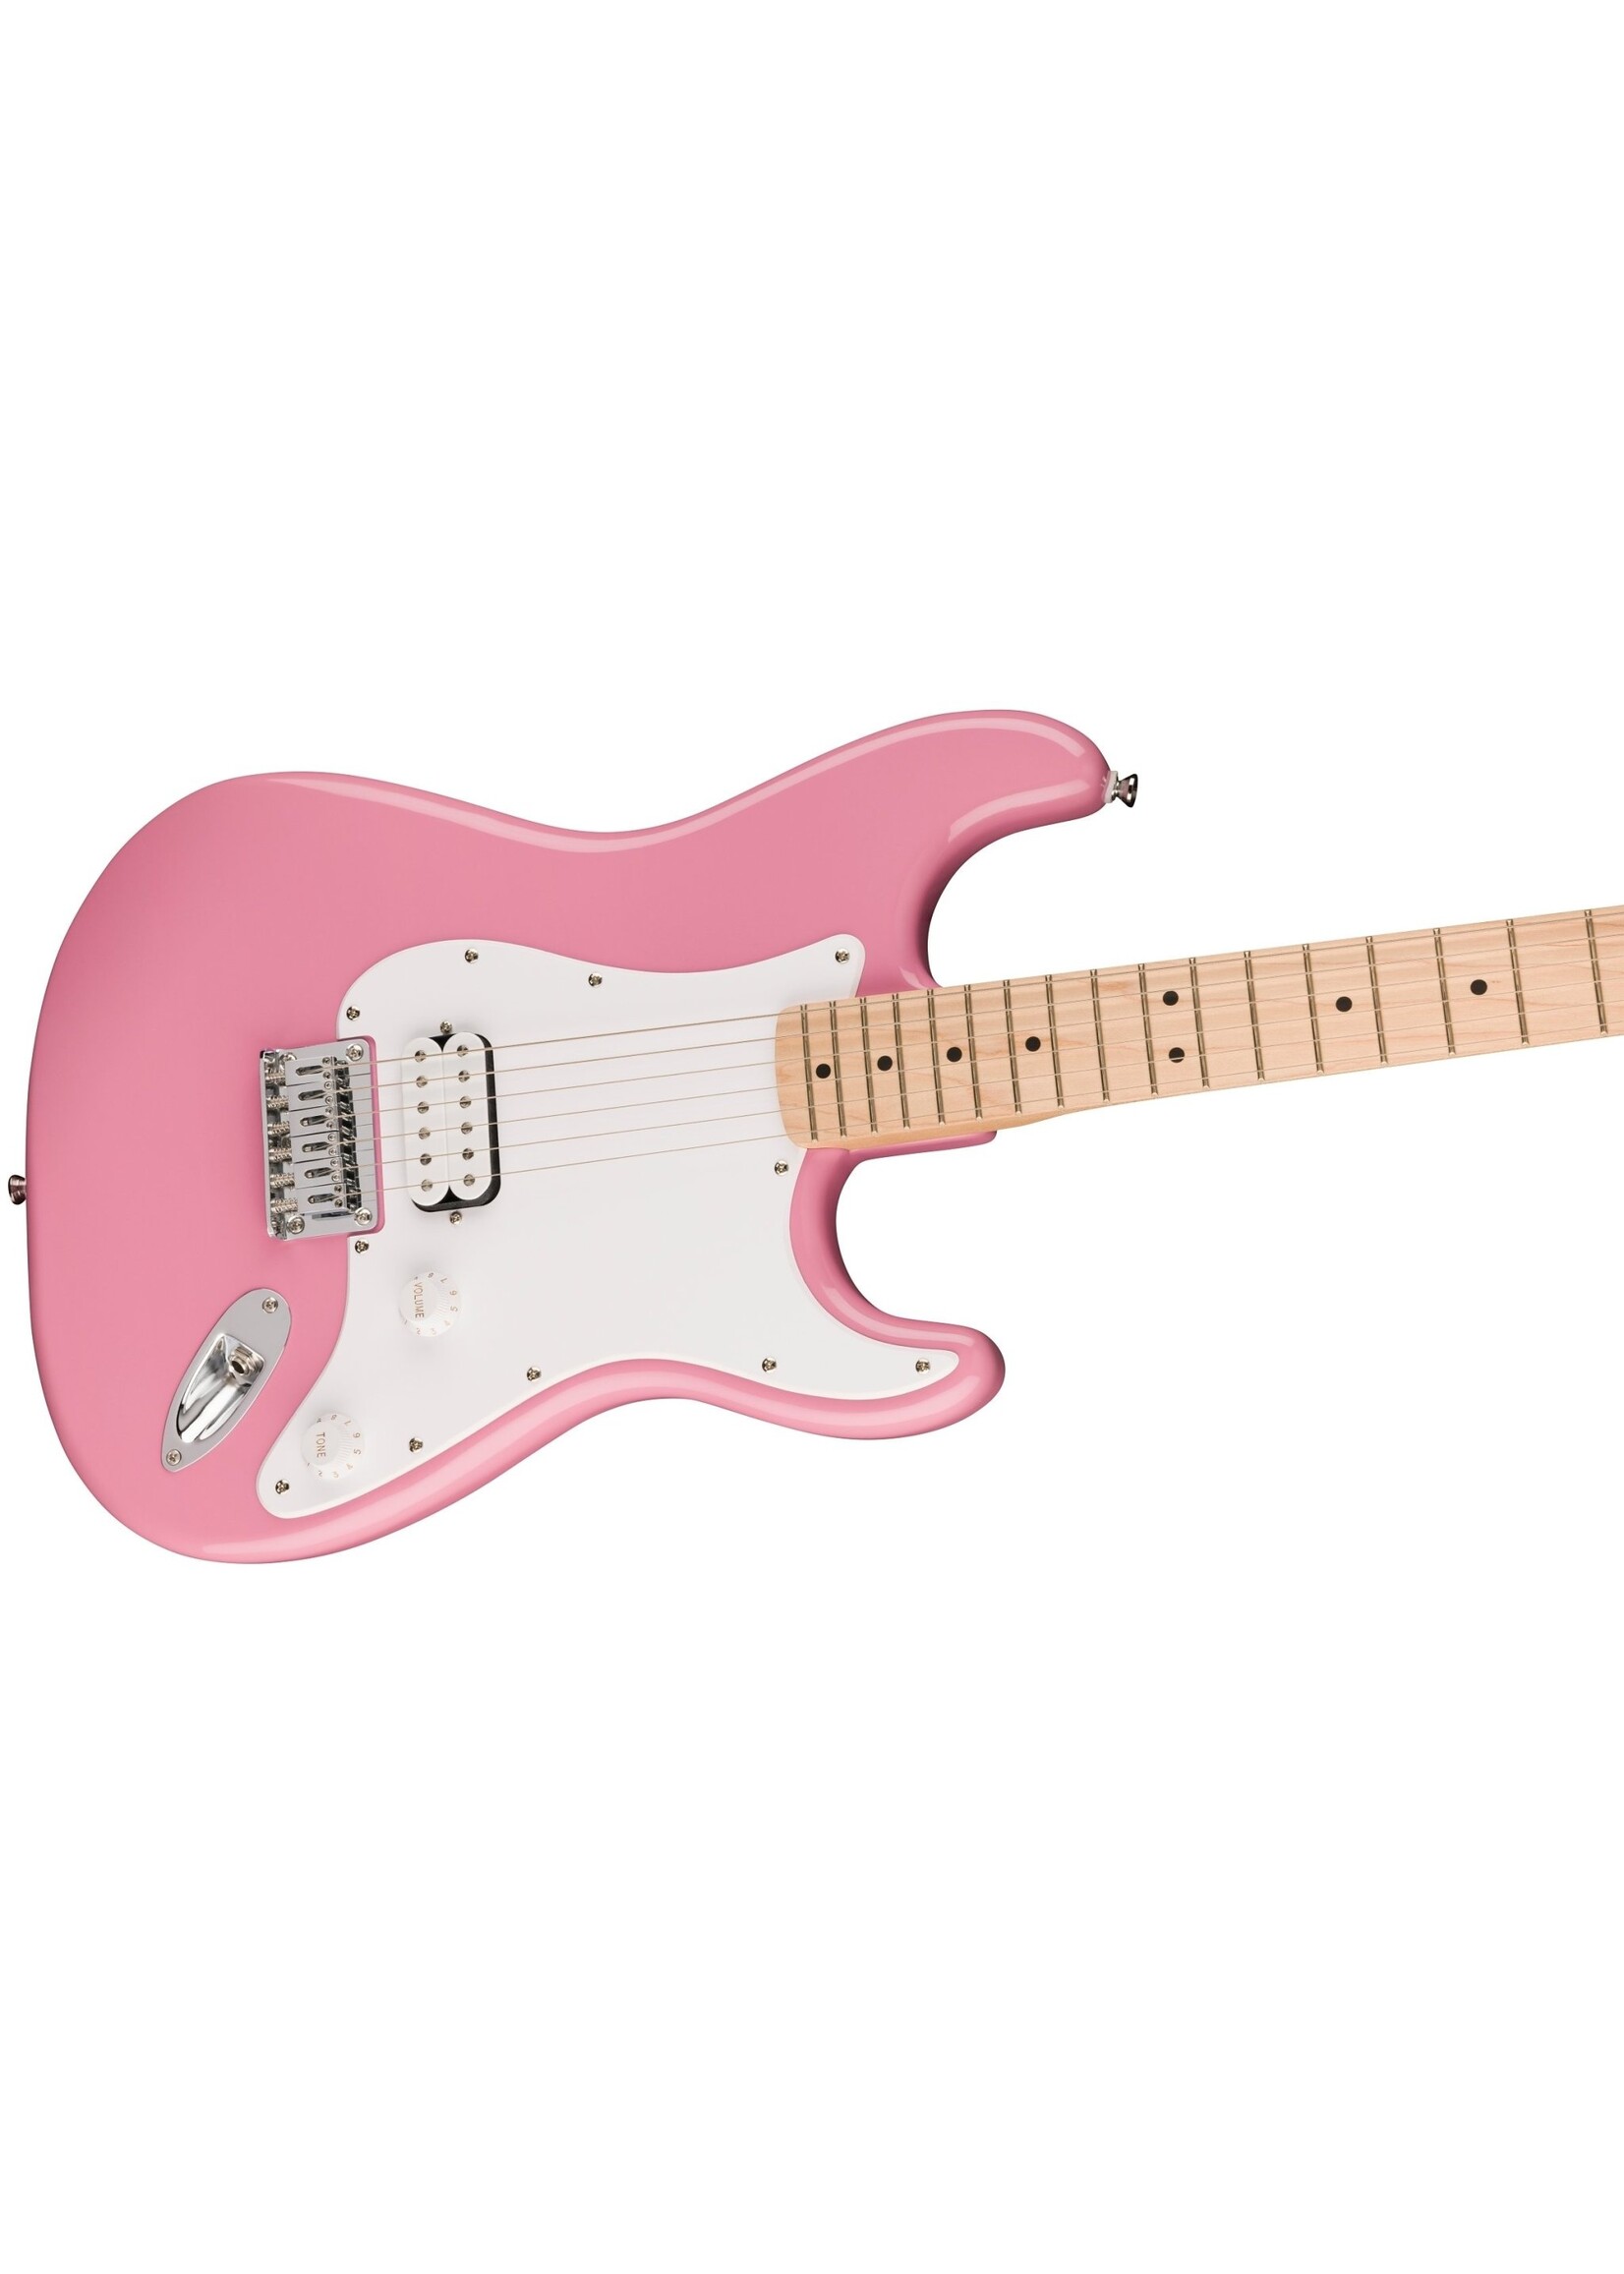 Squier Squier Sonic Stratocaster HT H, Maple Fingerboard, White Pickguard, Flash Pink